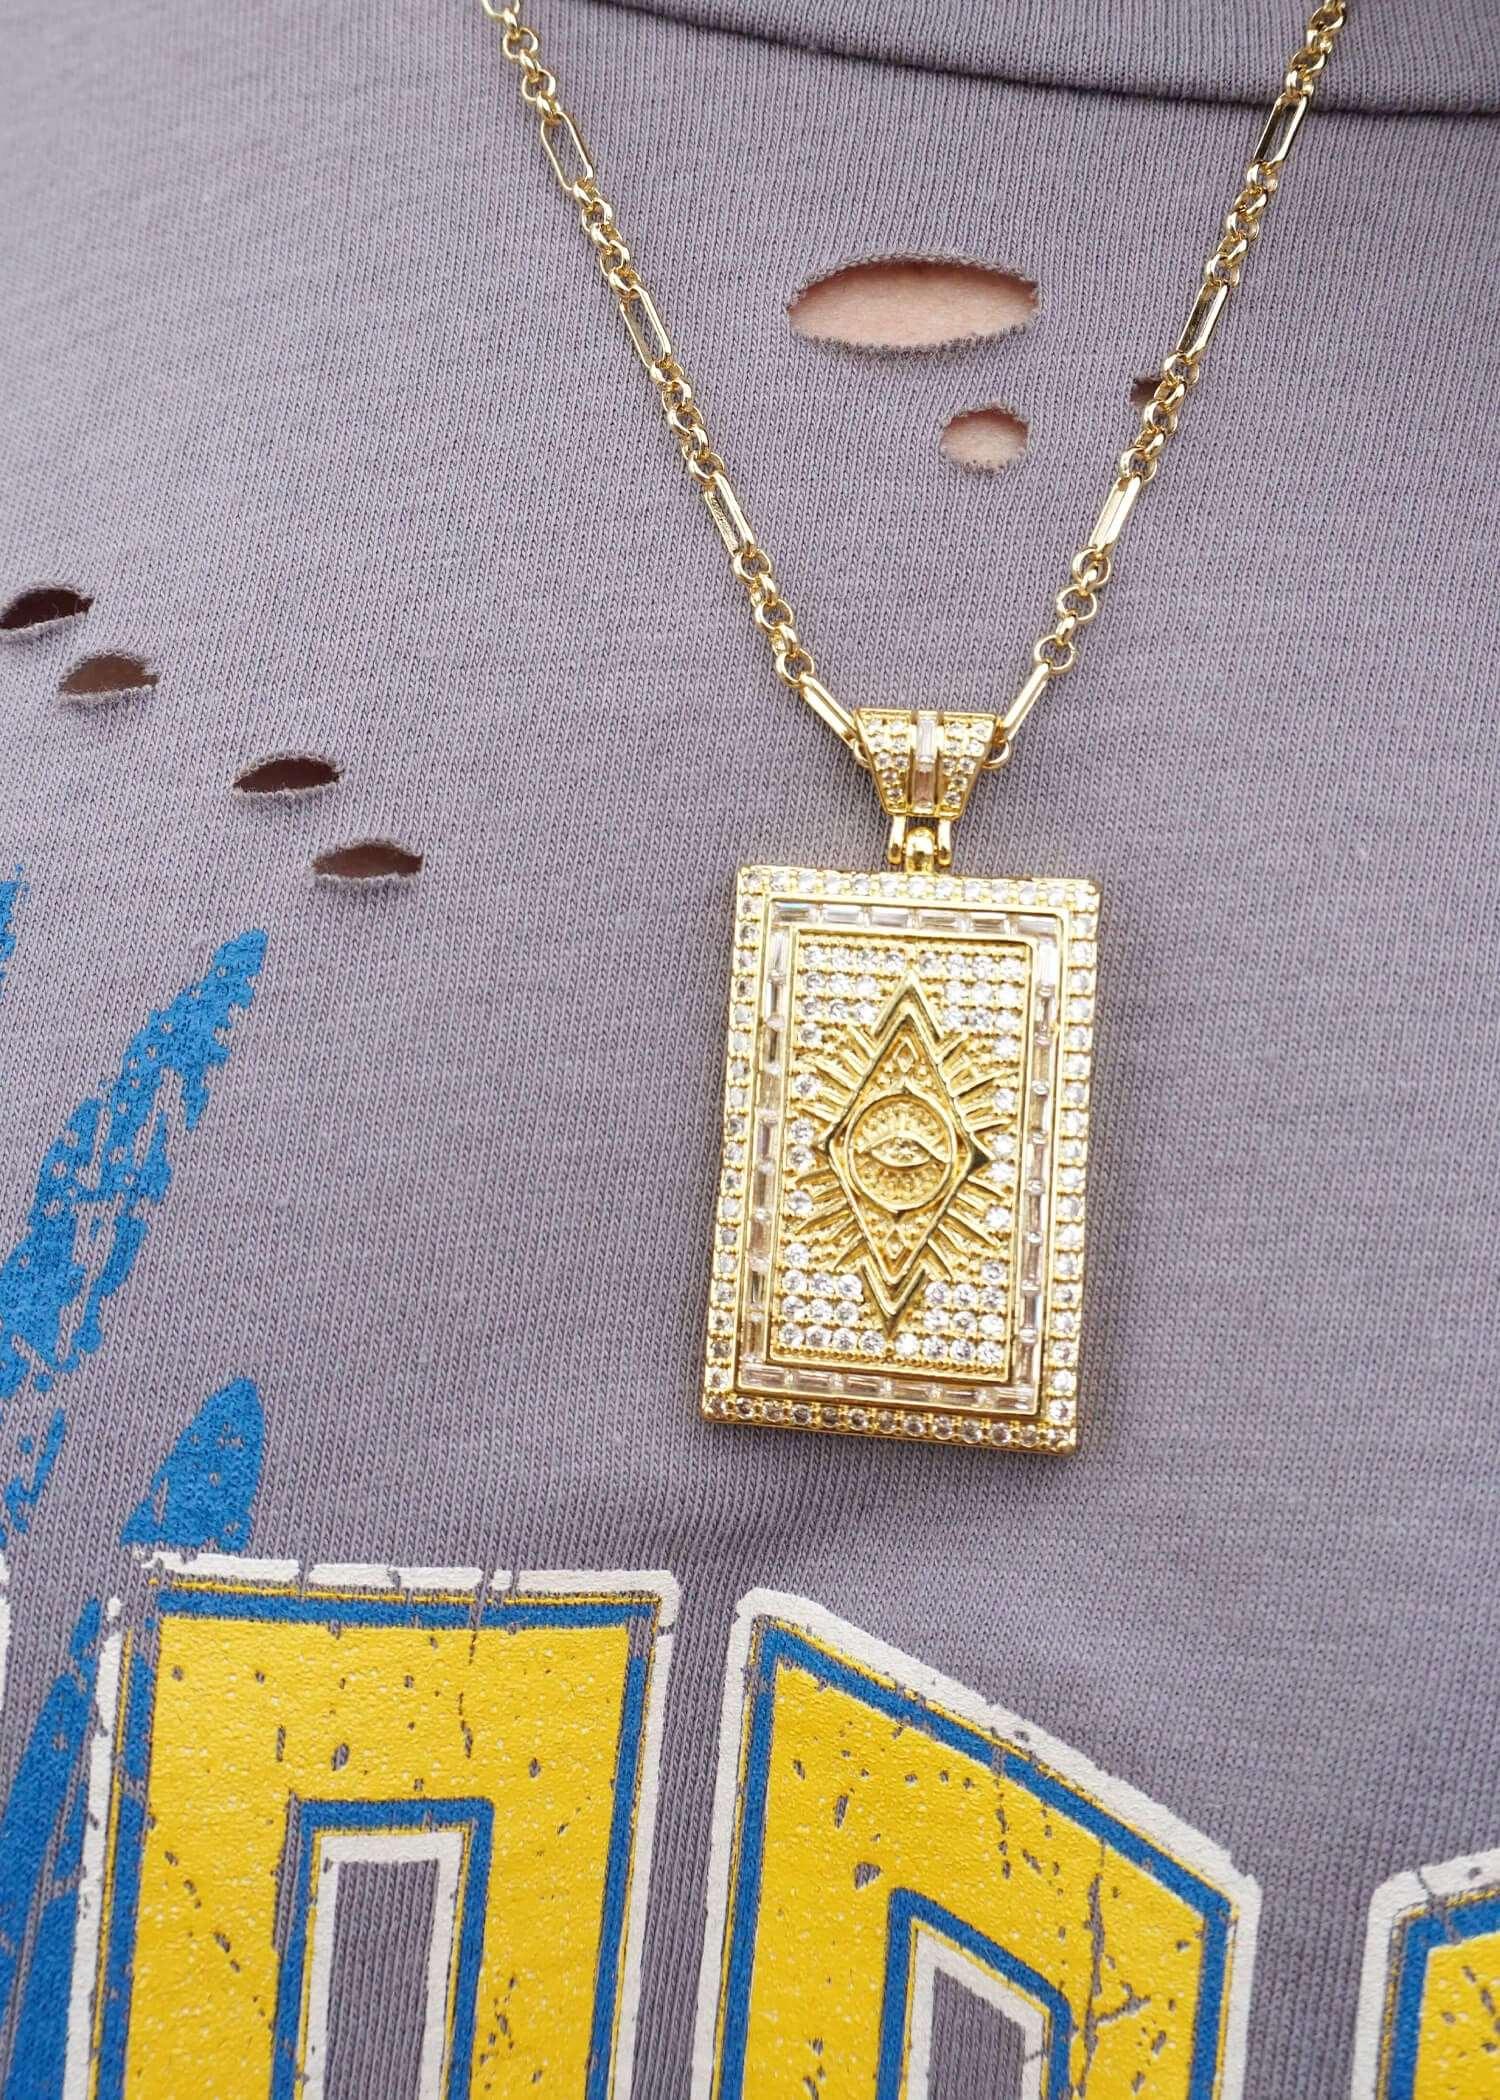 Always Watching Pendant Necklace - Gold Necklace MerciGrace Boutique.